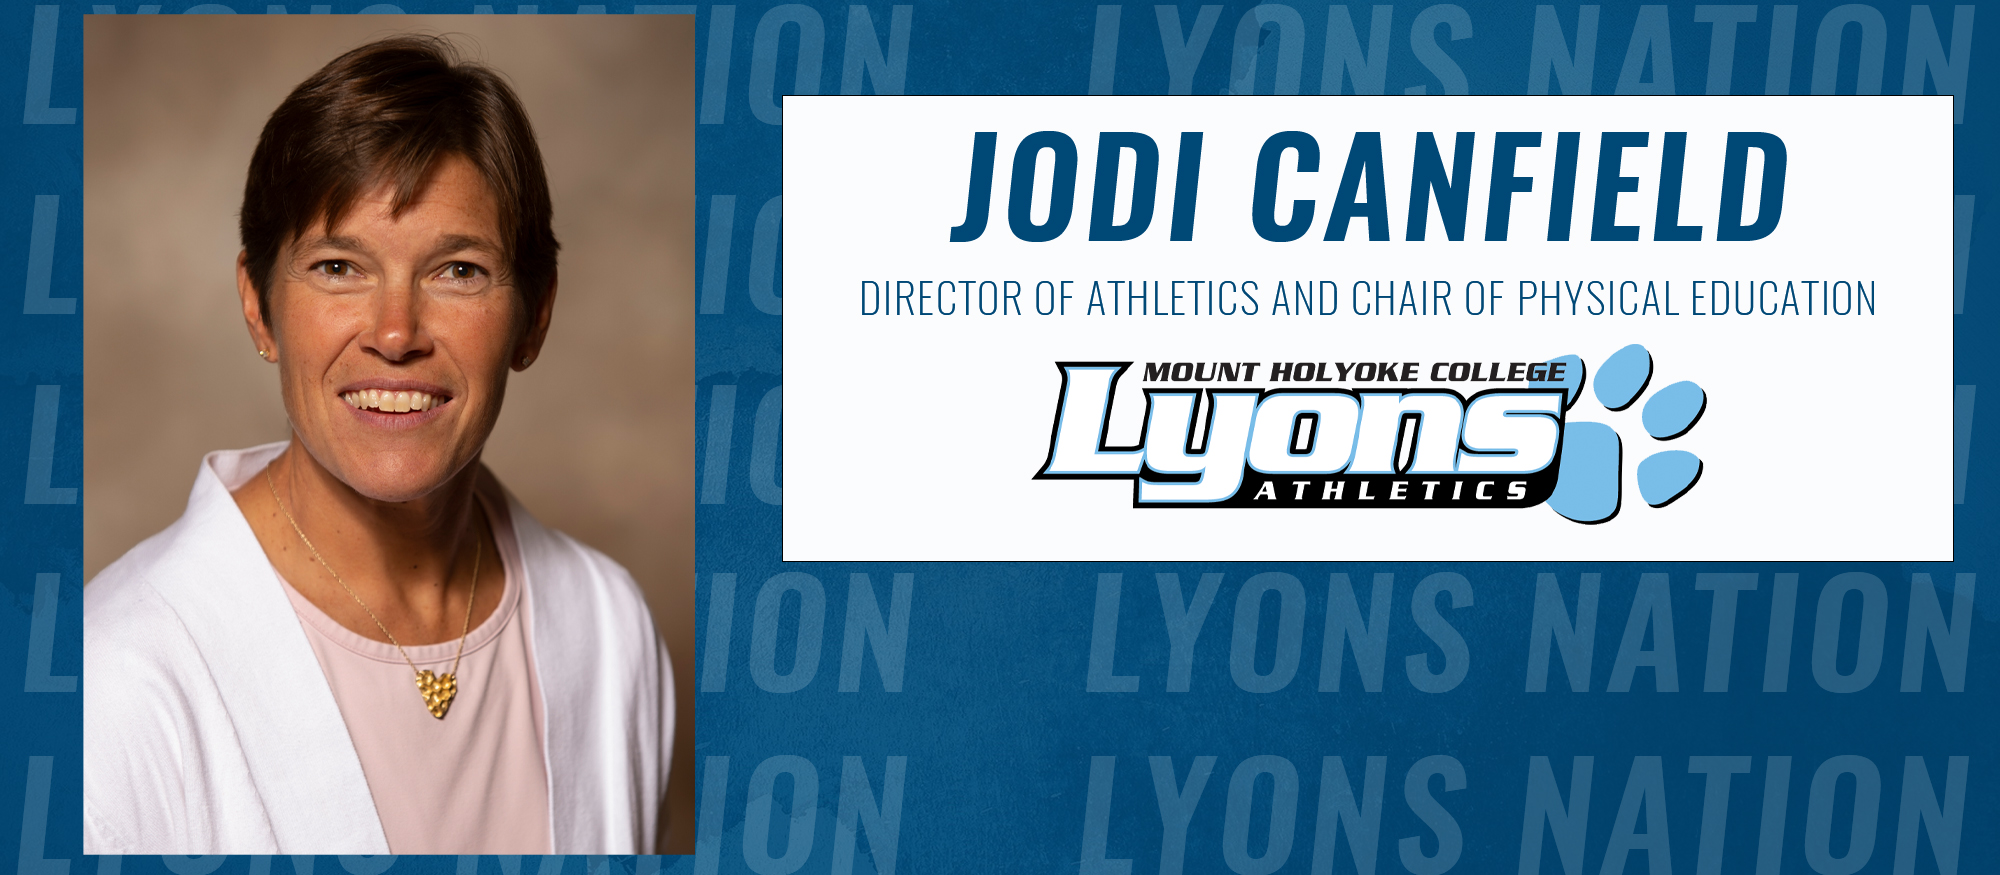 Jodi Canfield Named Director of Athletics and Chair of Physical Education at Mount Holyoke College